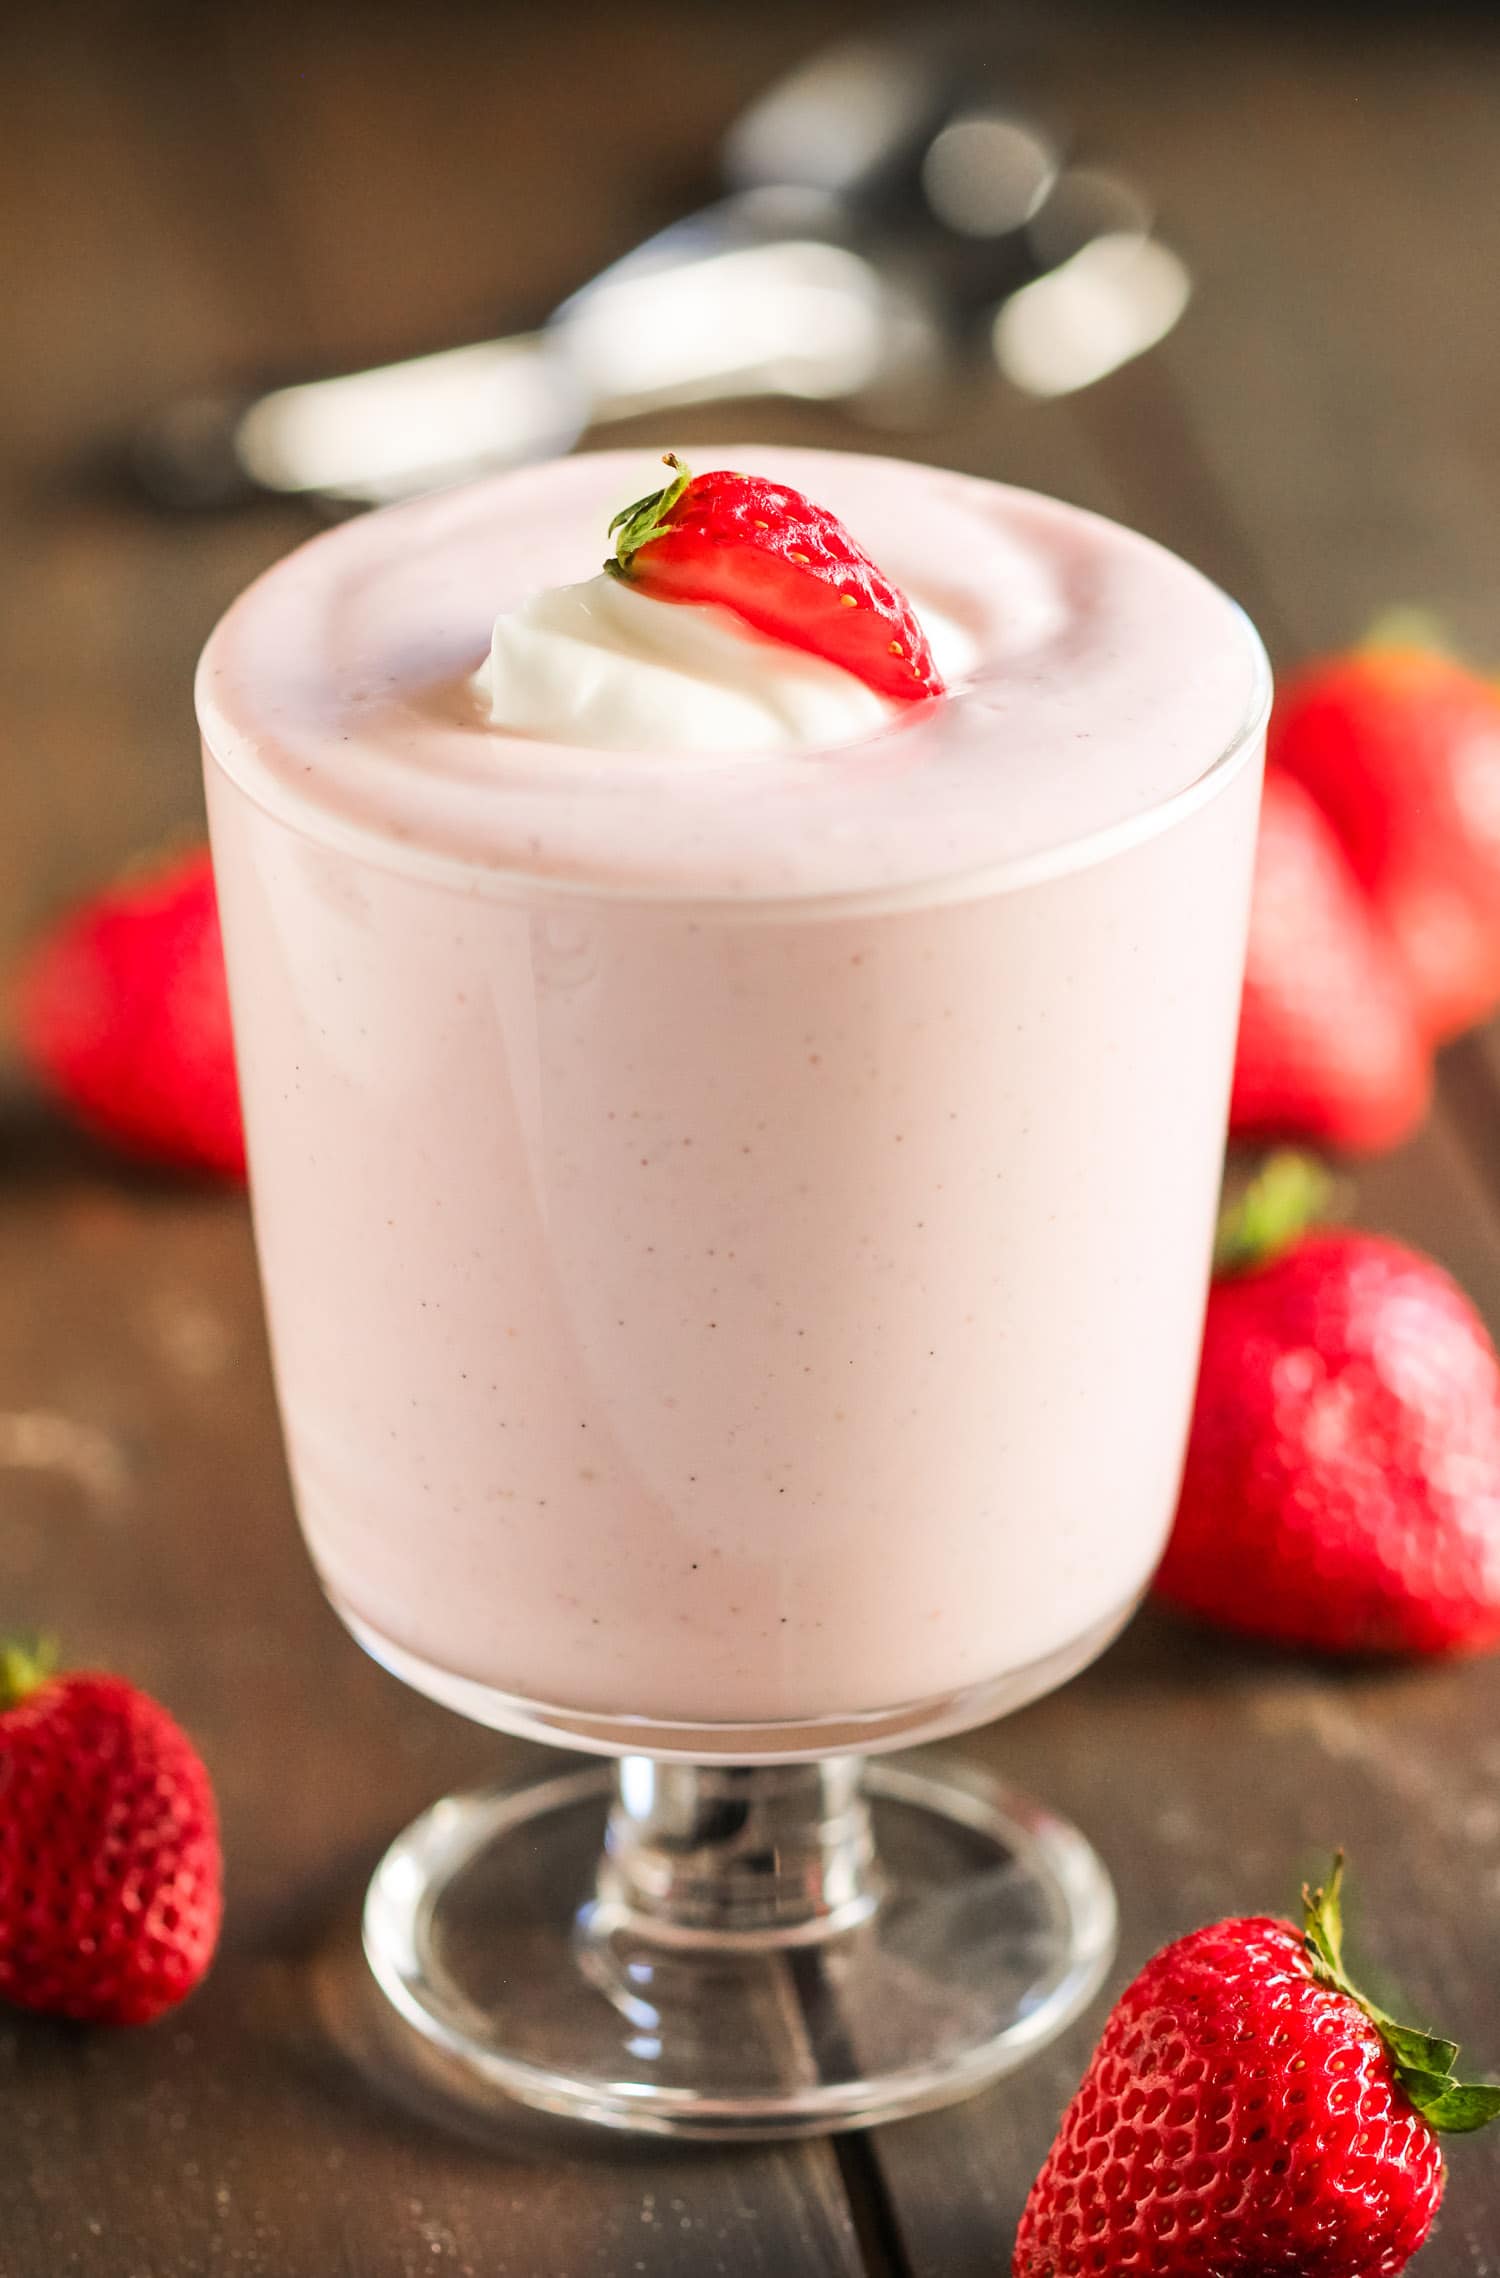 Healthy Strawberry Cheesecake Dip (70 calories)